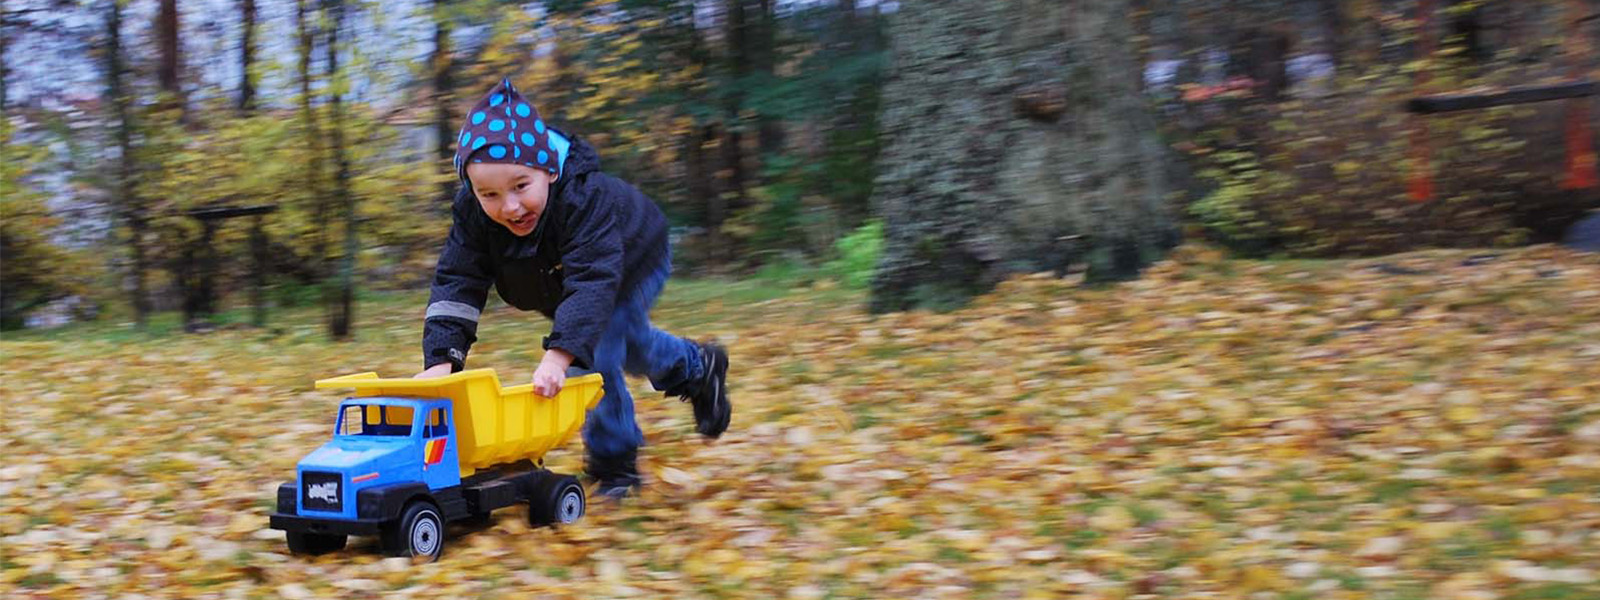 The present sample of children was physically more active outdoors than indoors. For instance, plays with touching, riding, or pushing wheeled toys such as tricycles, scooters, and wagons showed higher levels of physical activity.